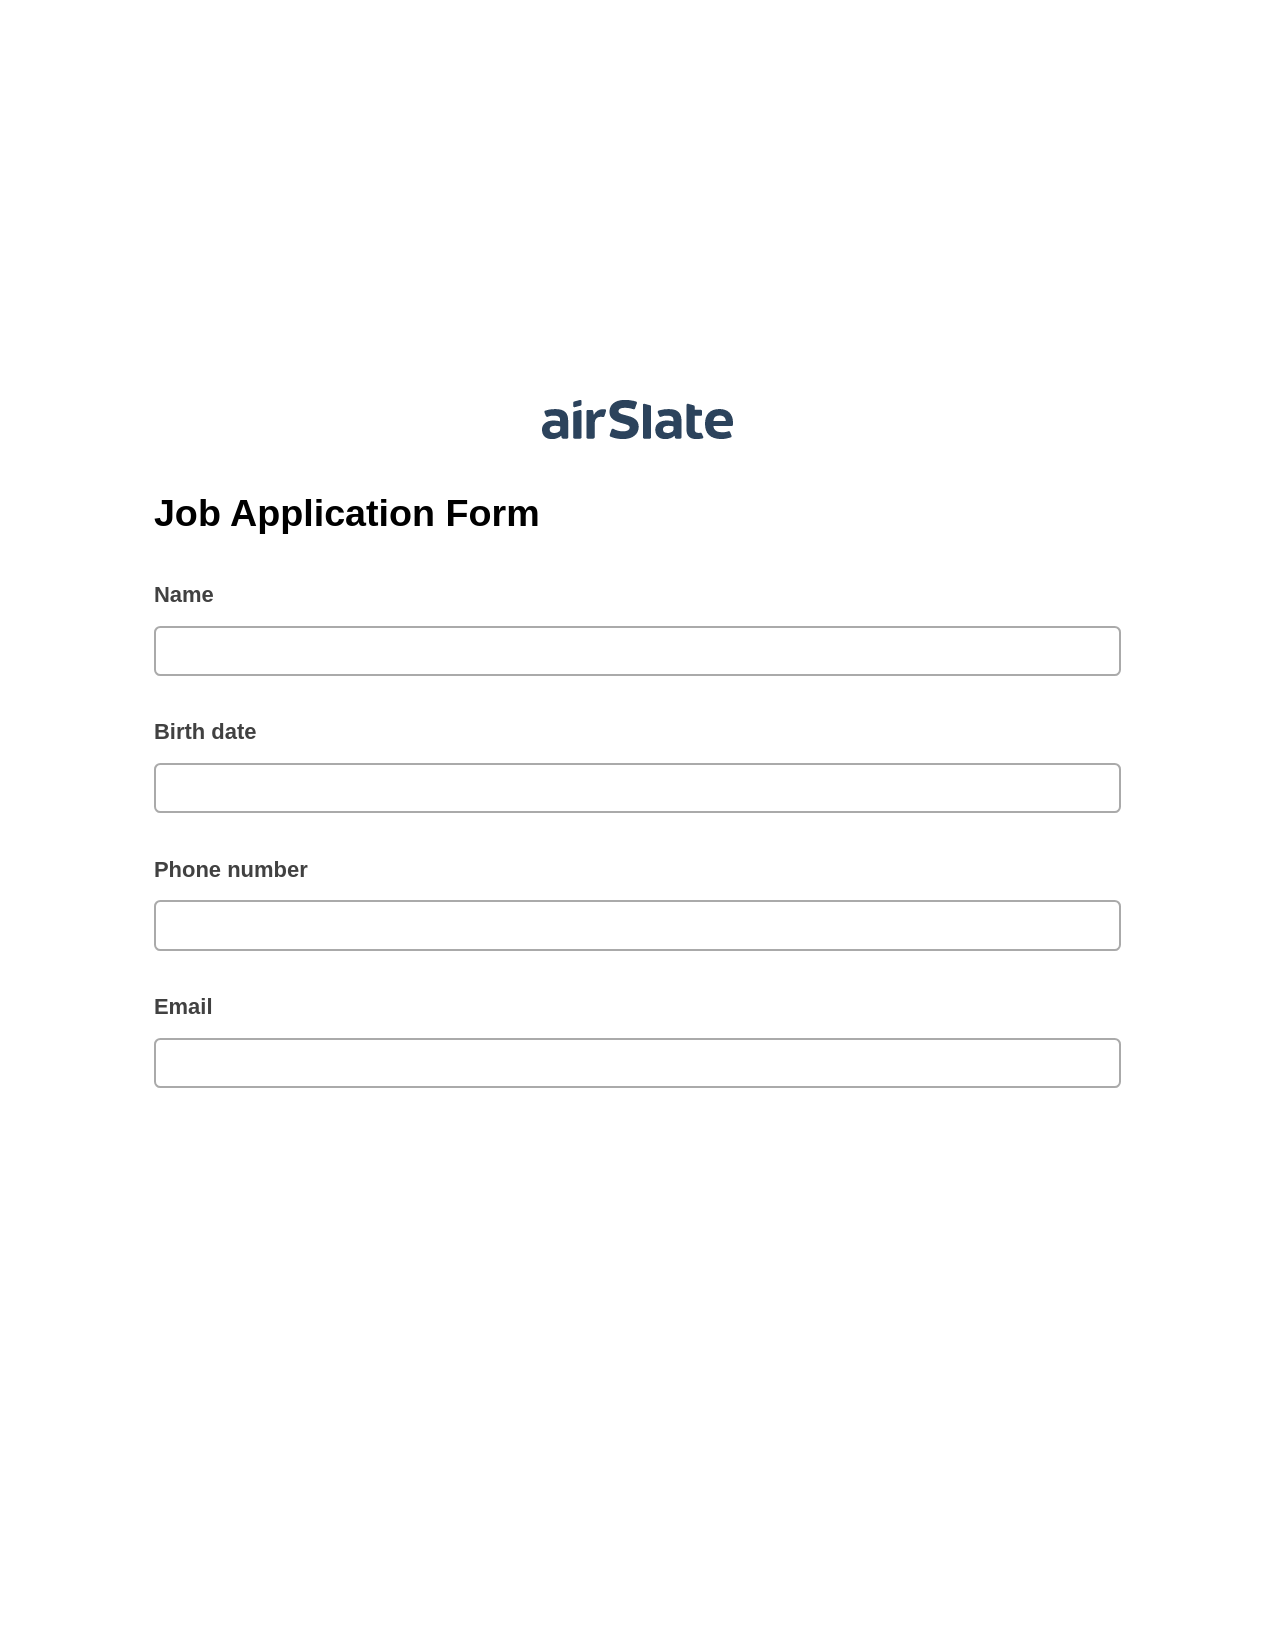 Multirole Job Application Form Pre-fill from Google Sheet Dropdown Options Bot, Text Message Notification Bot, Export to Formstack Documents Bot